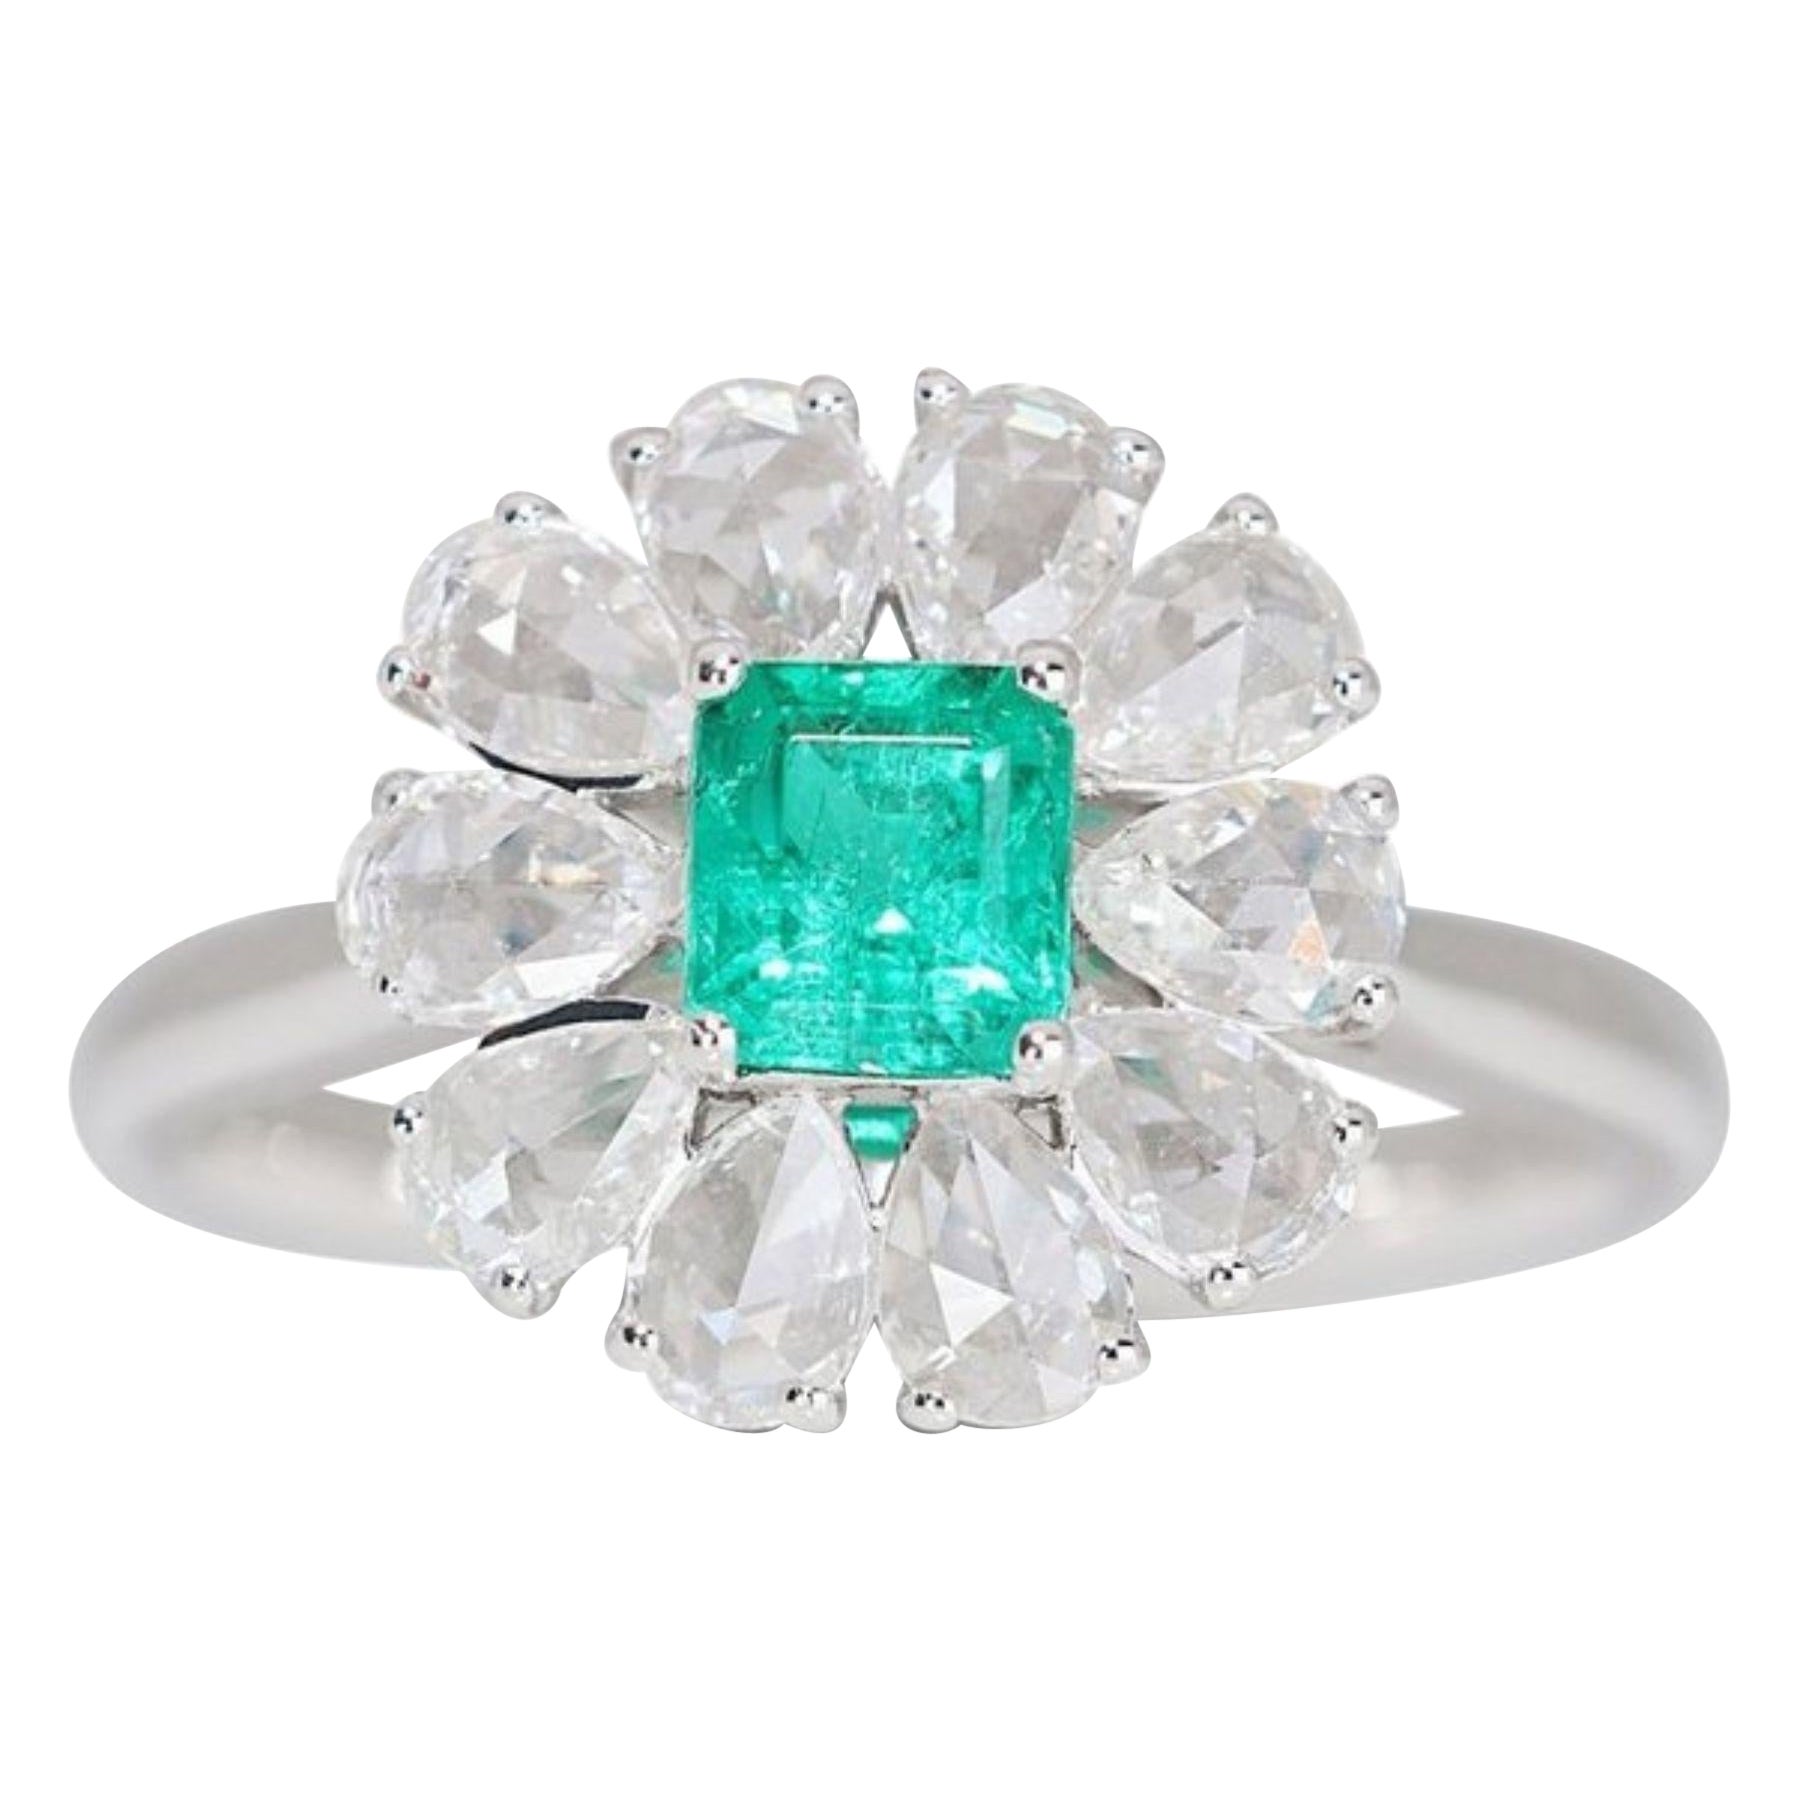 Magnificent 18K White Gold Emerald Flower Ring